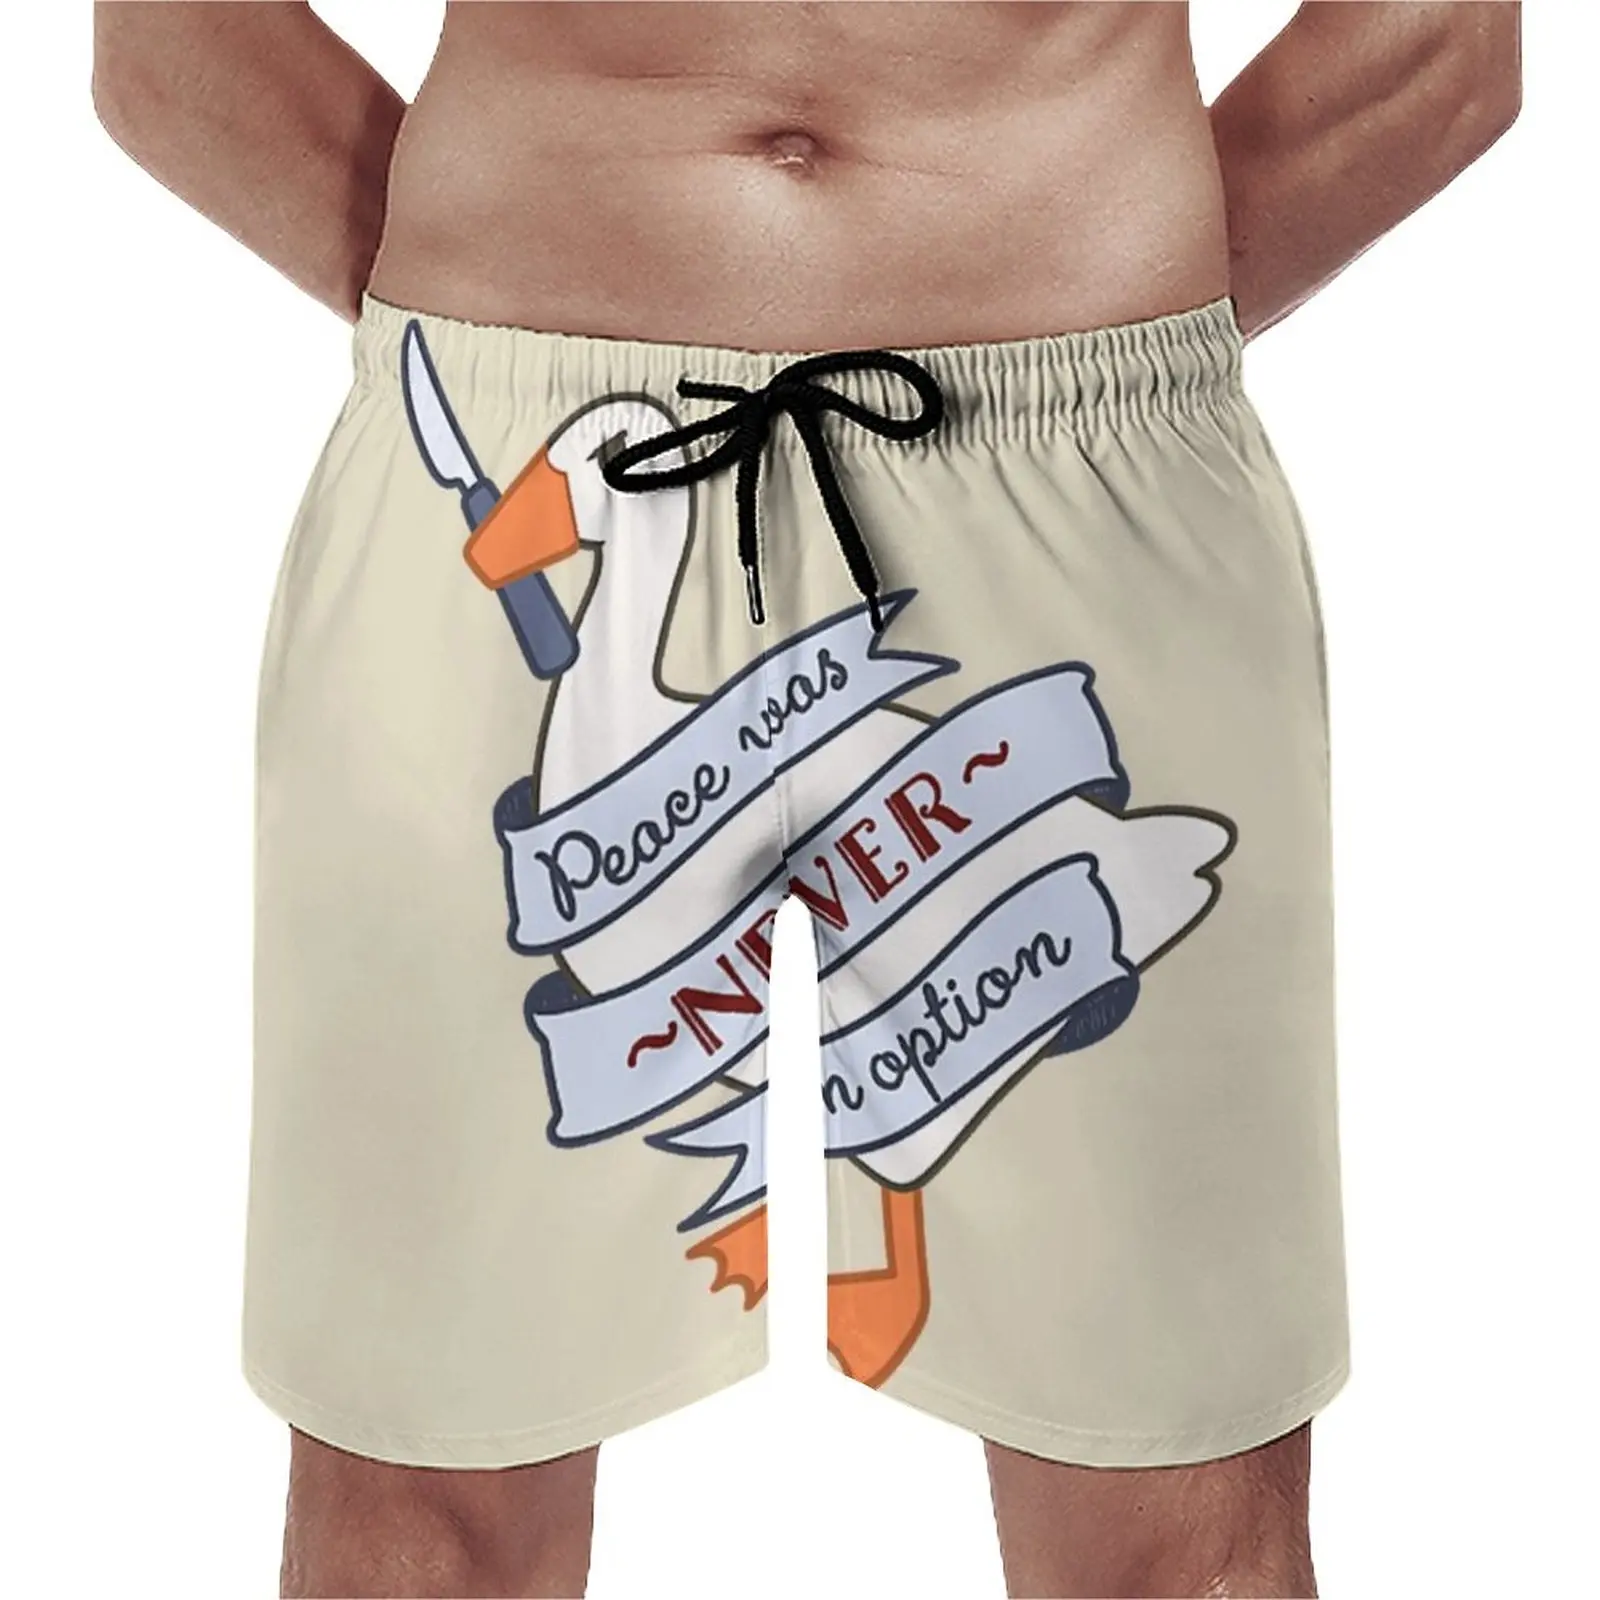 

Peace Was Never An Option Board Shorts Untitled Goose Game Humor Beach Short Pants Hot Sale Males Cute Print Swimming Trunks